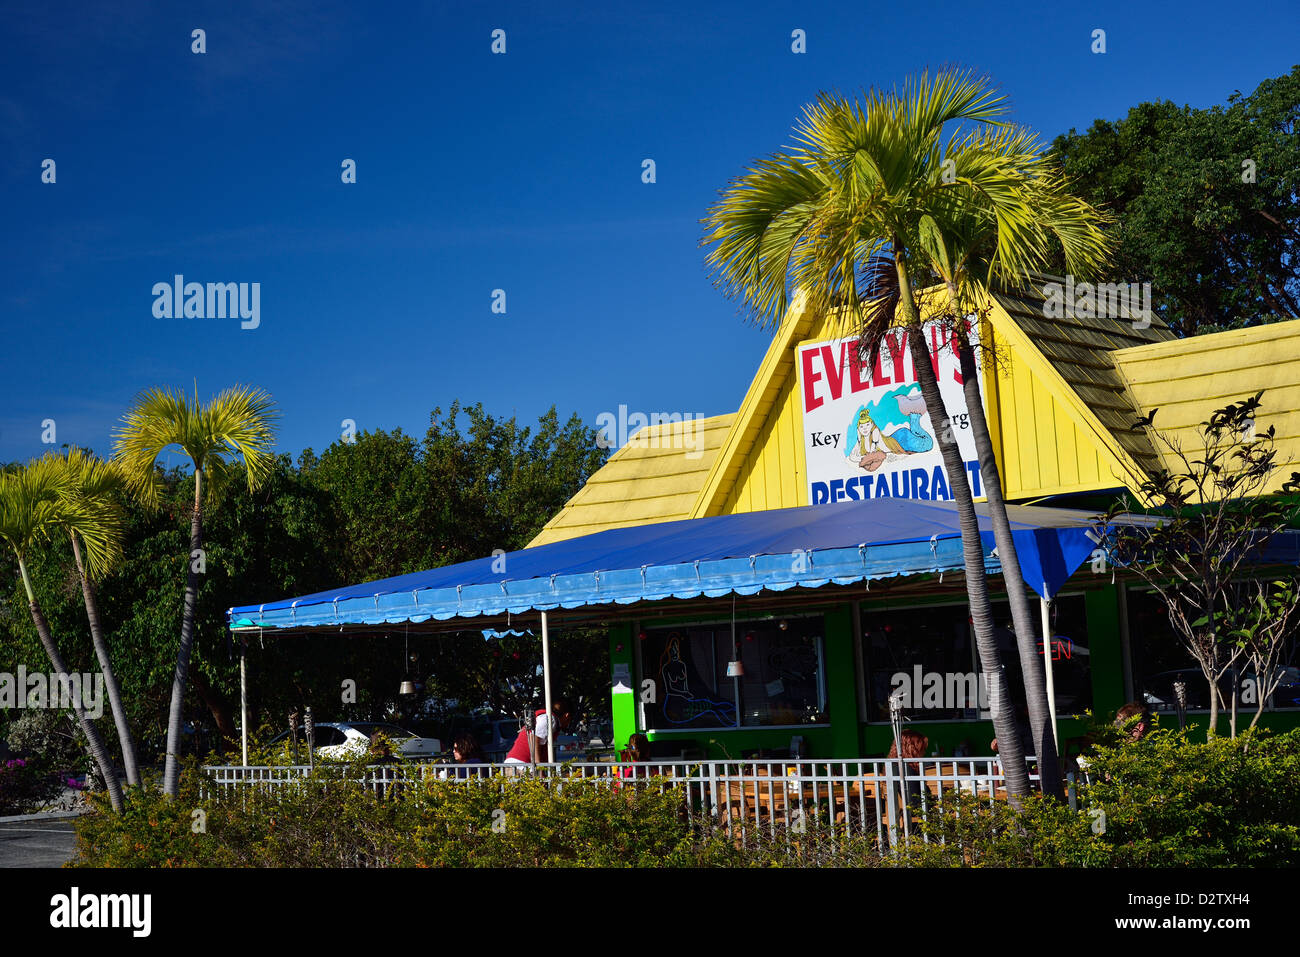 Colorfully painted outside of a local restaurant. Key Largo, Florida, USA. Stock Photo